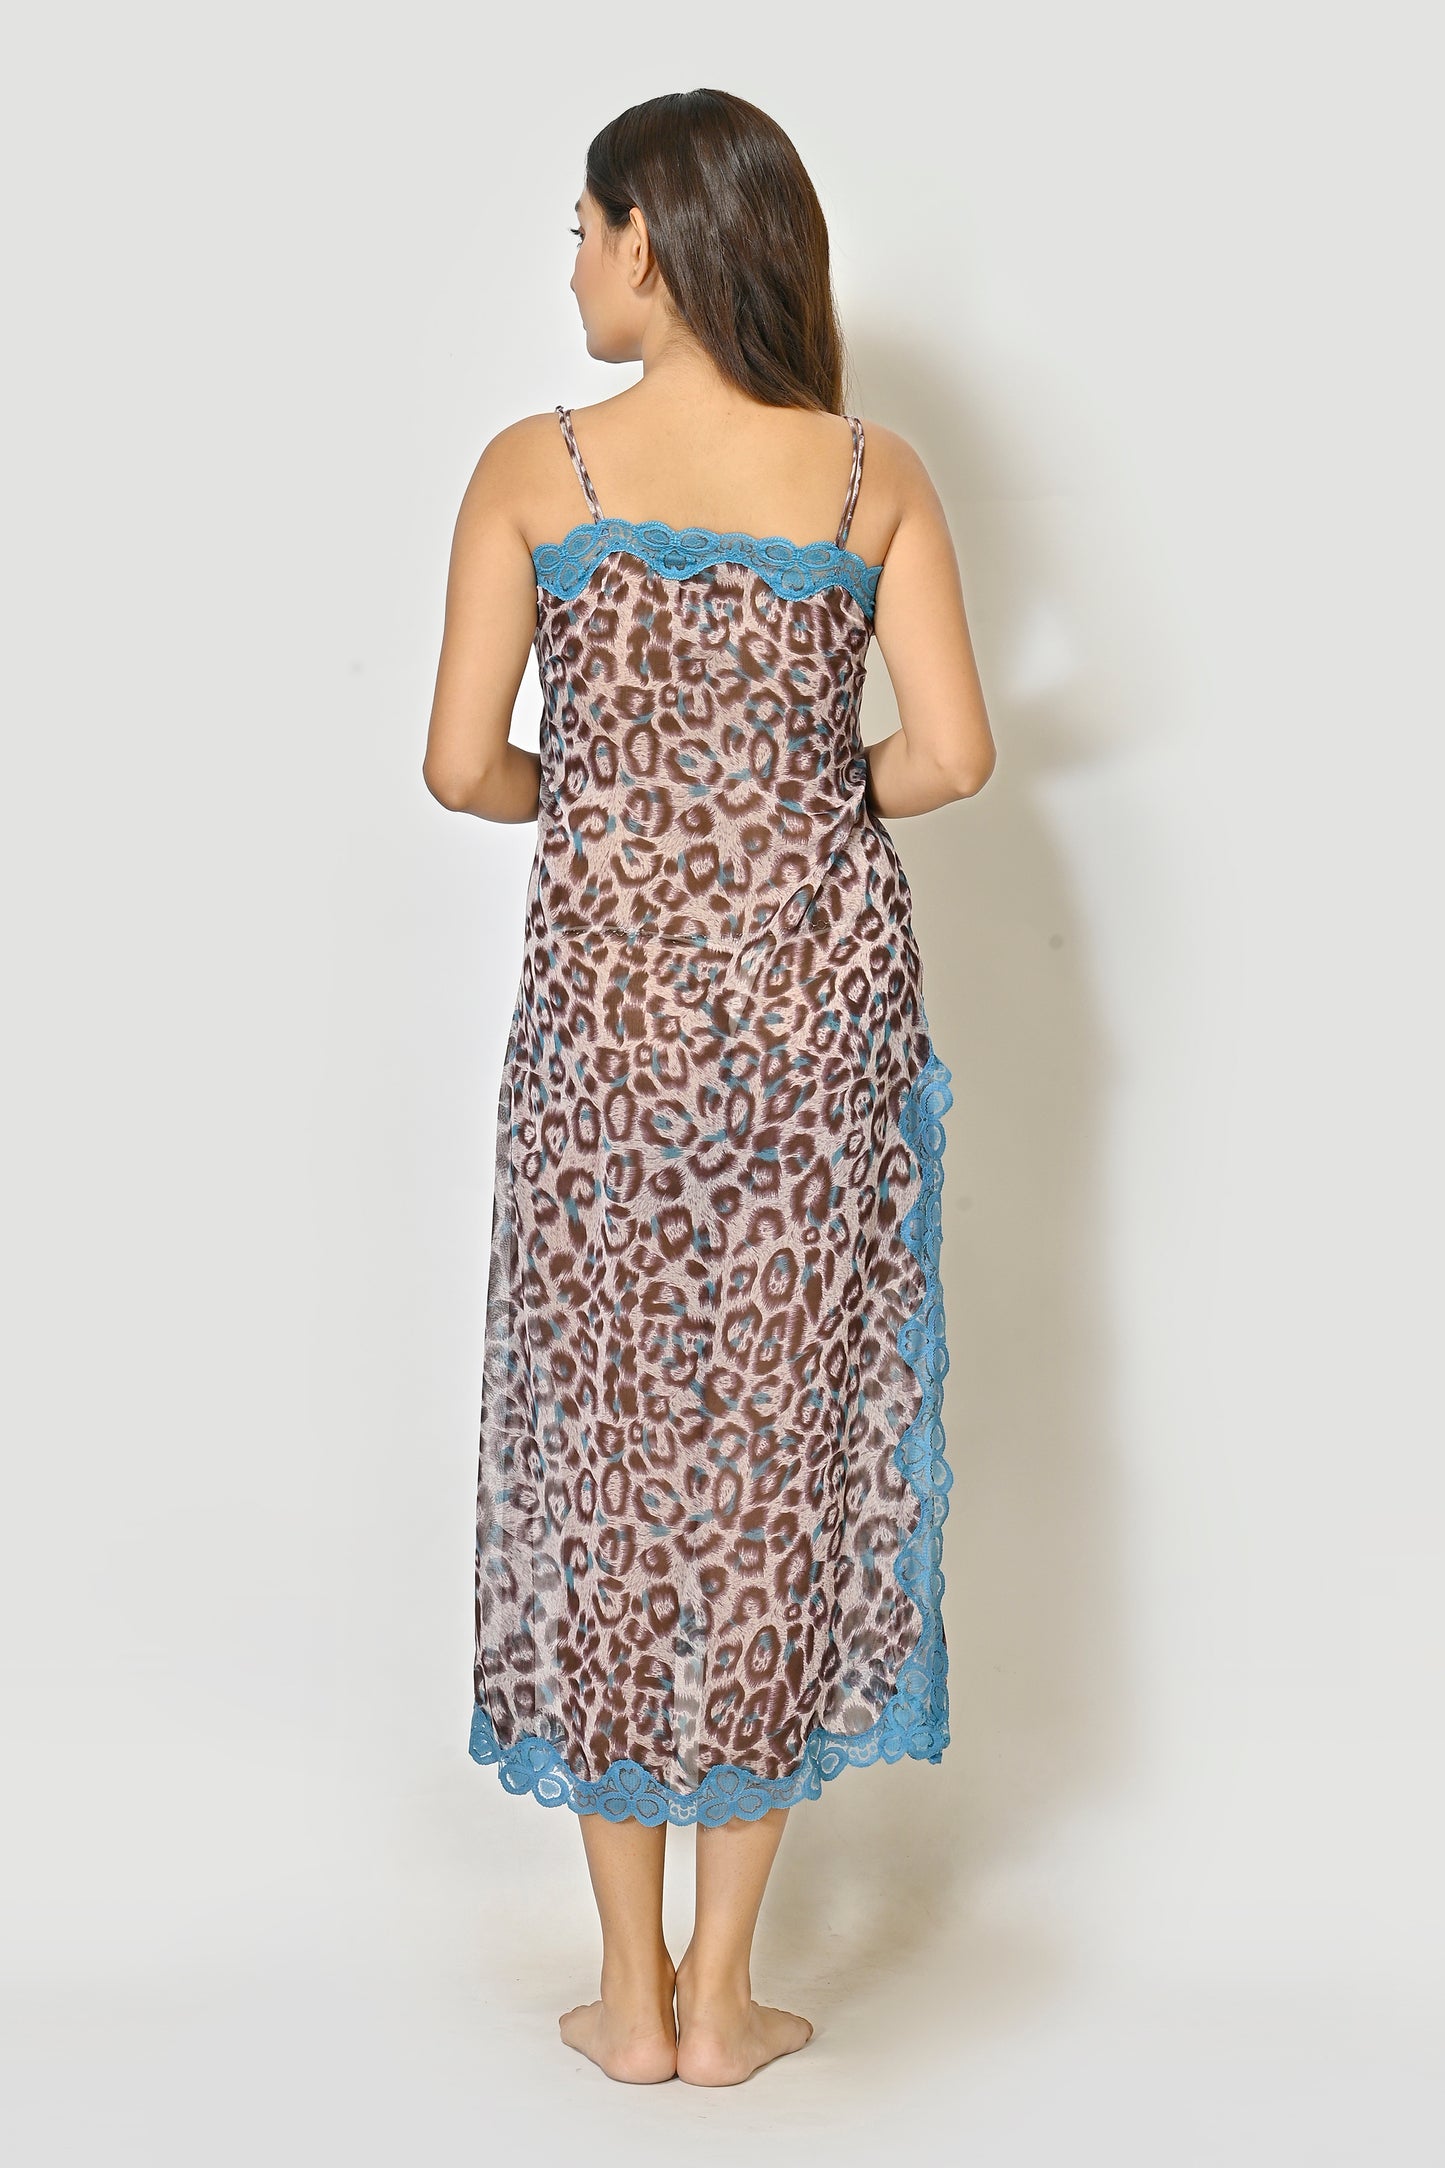 Women French Georgette  Brown And Blue Animal Printed Bridal Baby Doll Nighty